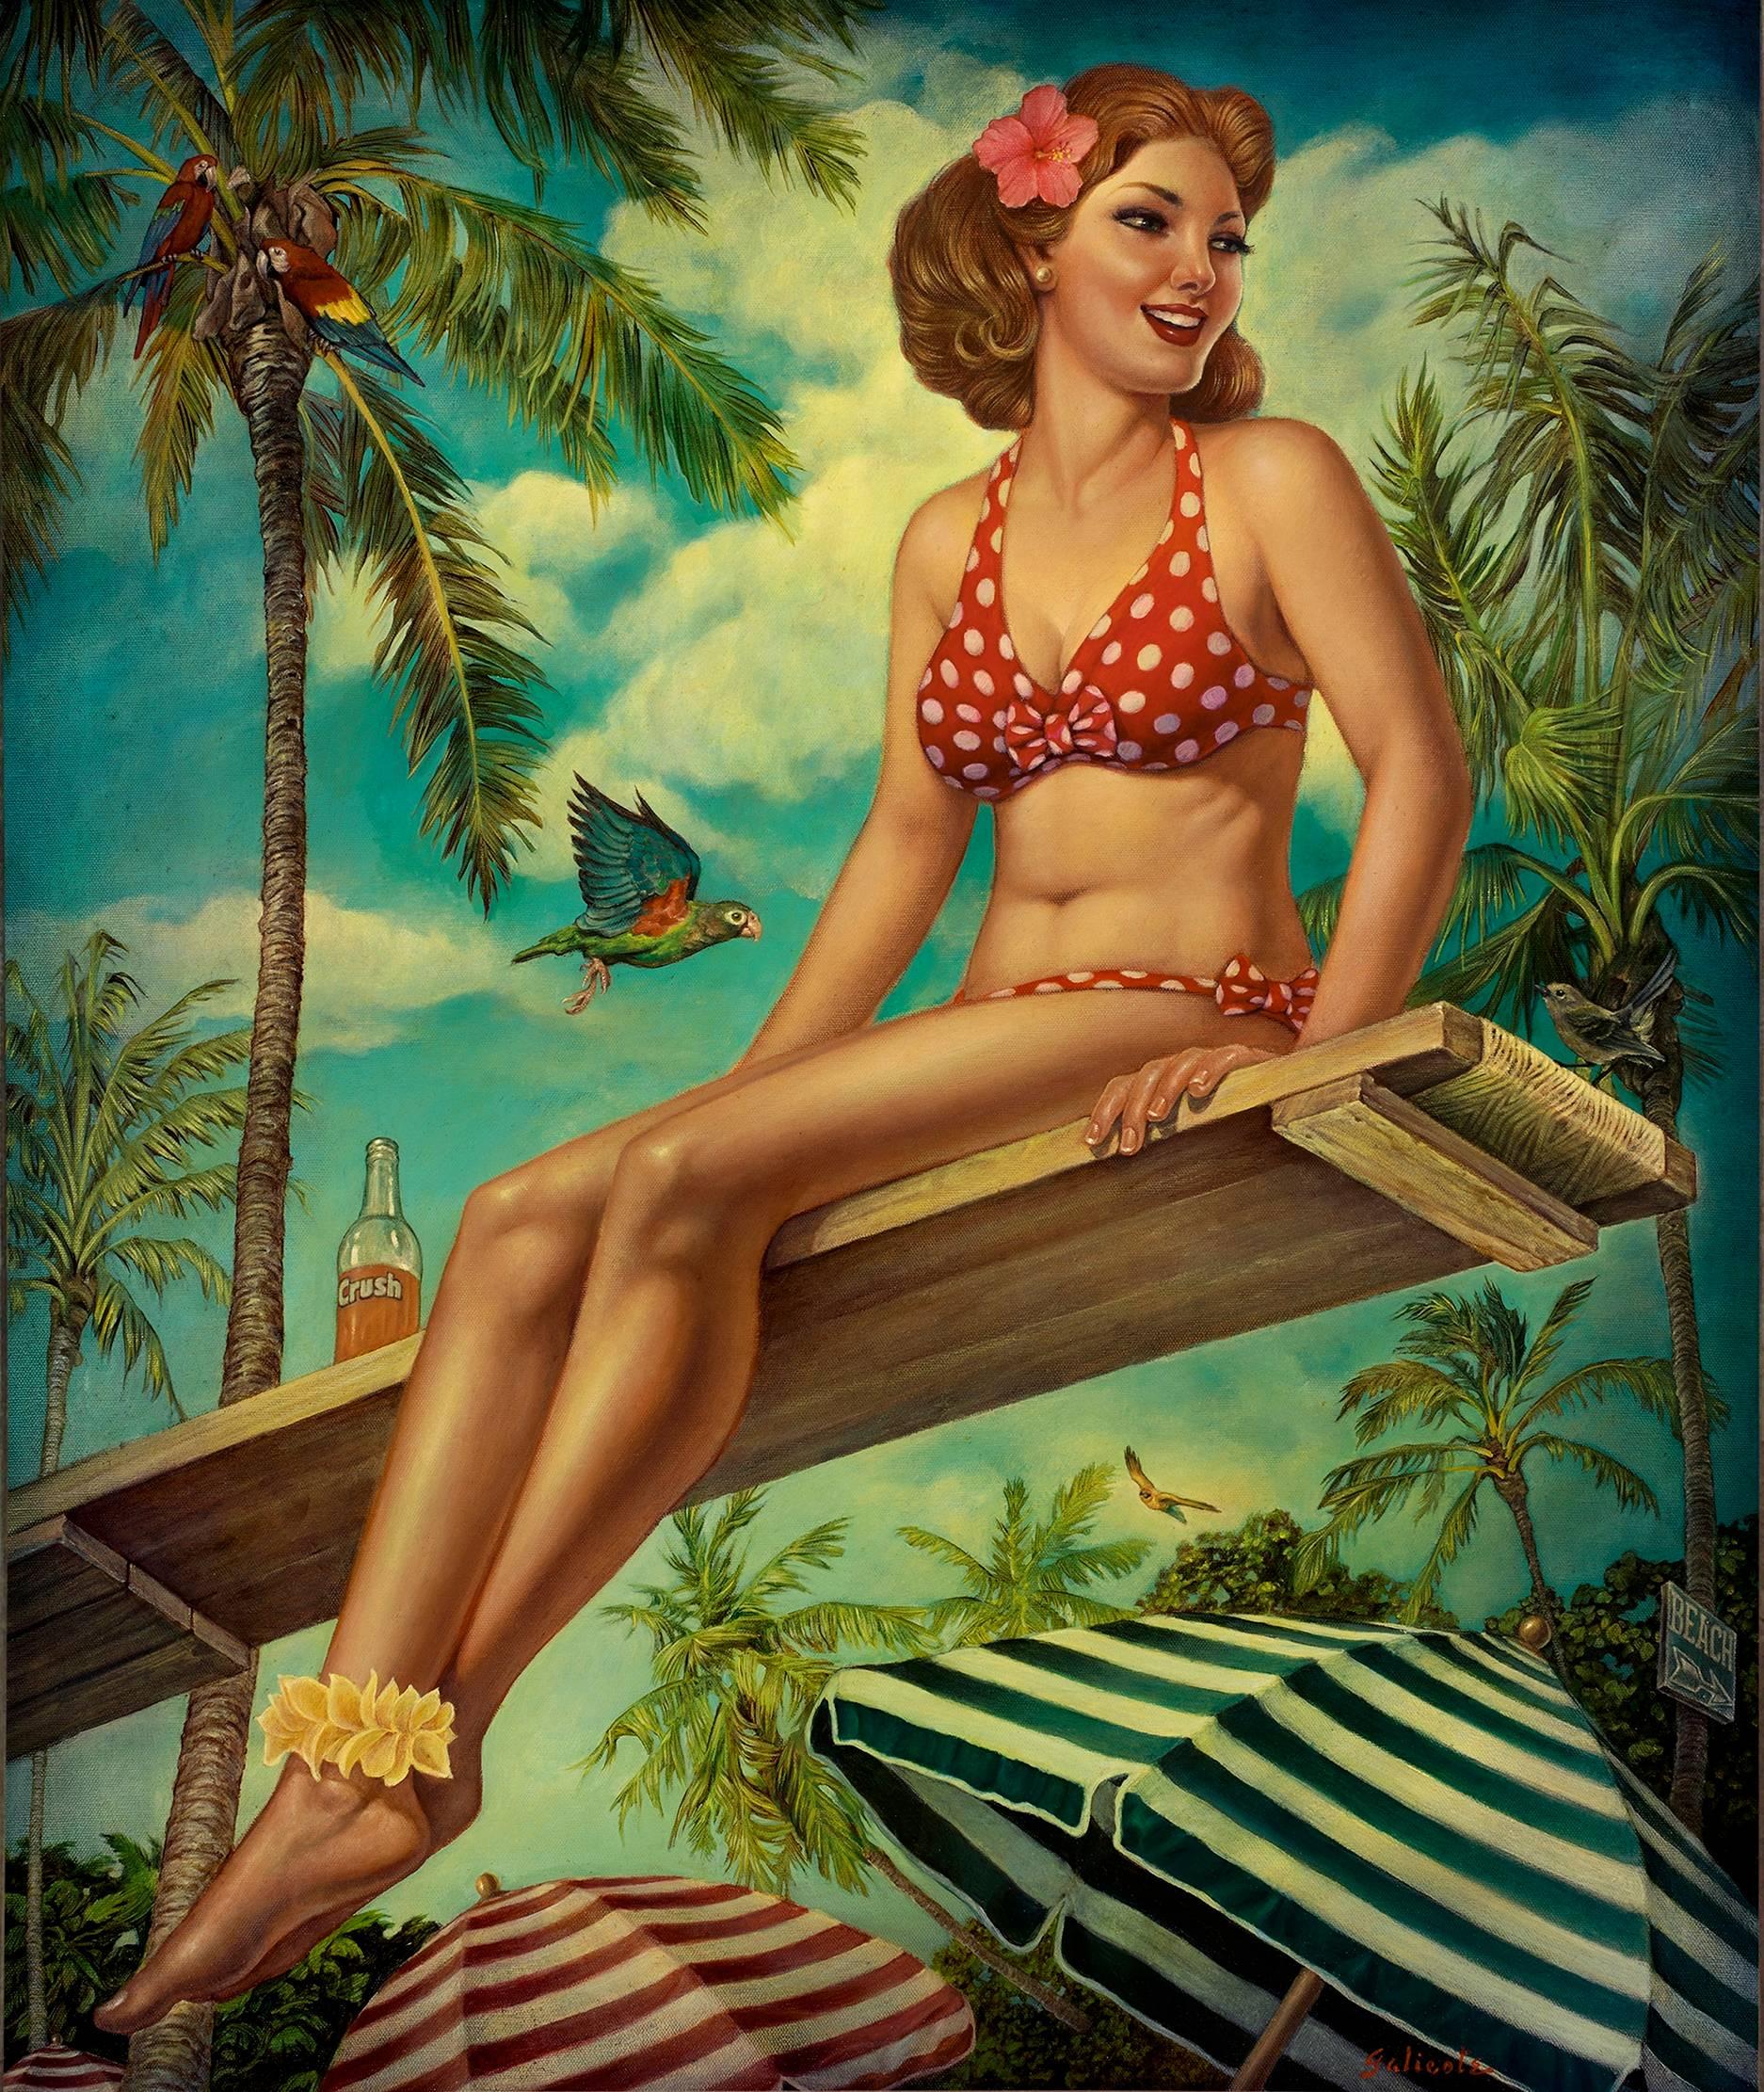 "High On Summertime" - Painting by Danny Galieote